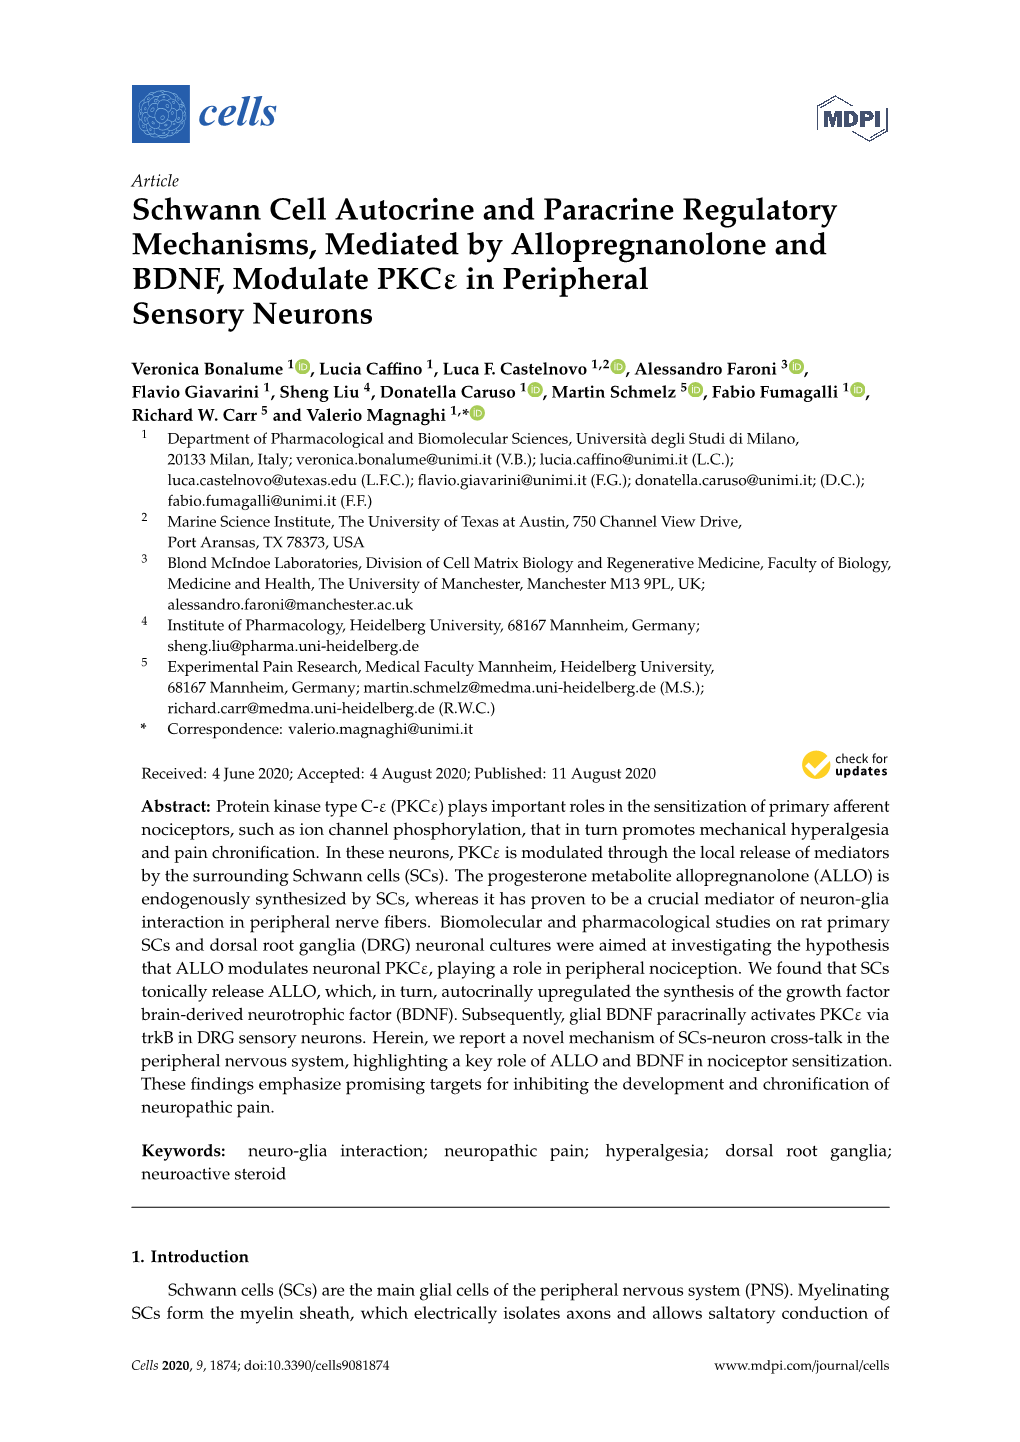 Schwann Cell Autocrine and Paracrine Regulatory Mechanisms, Mediated by Allopregnanolone and BDNF, Modulate Pkcε in Peripheral Sensory Neurons